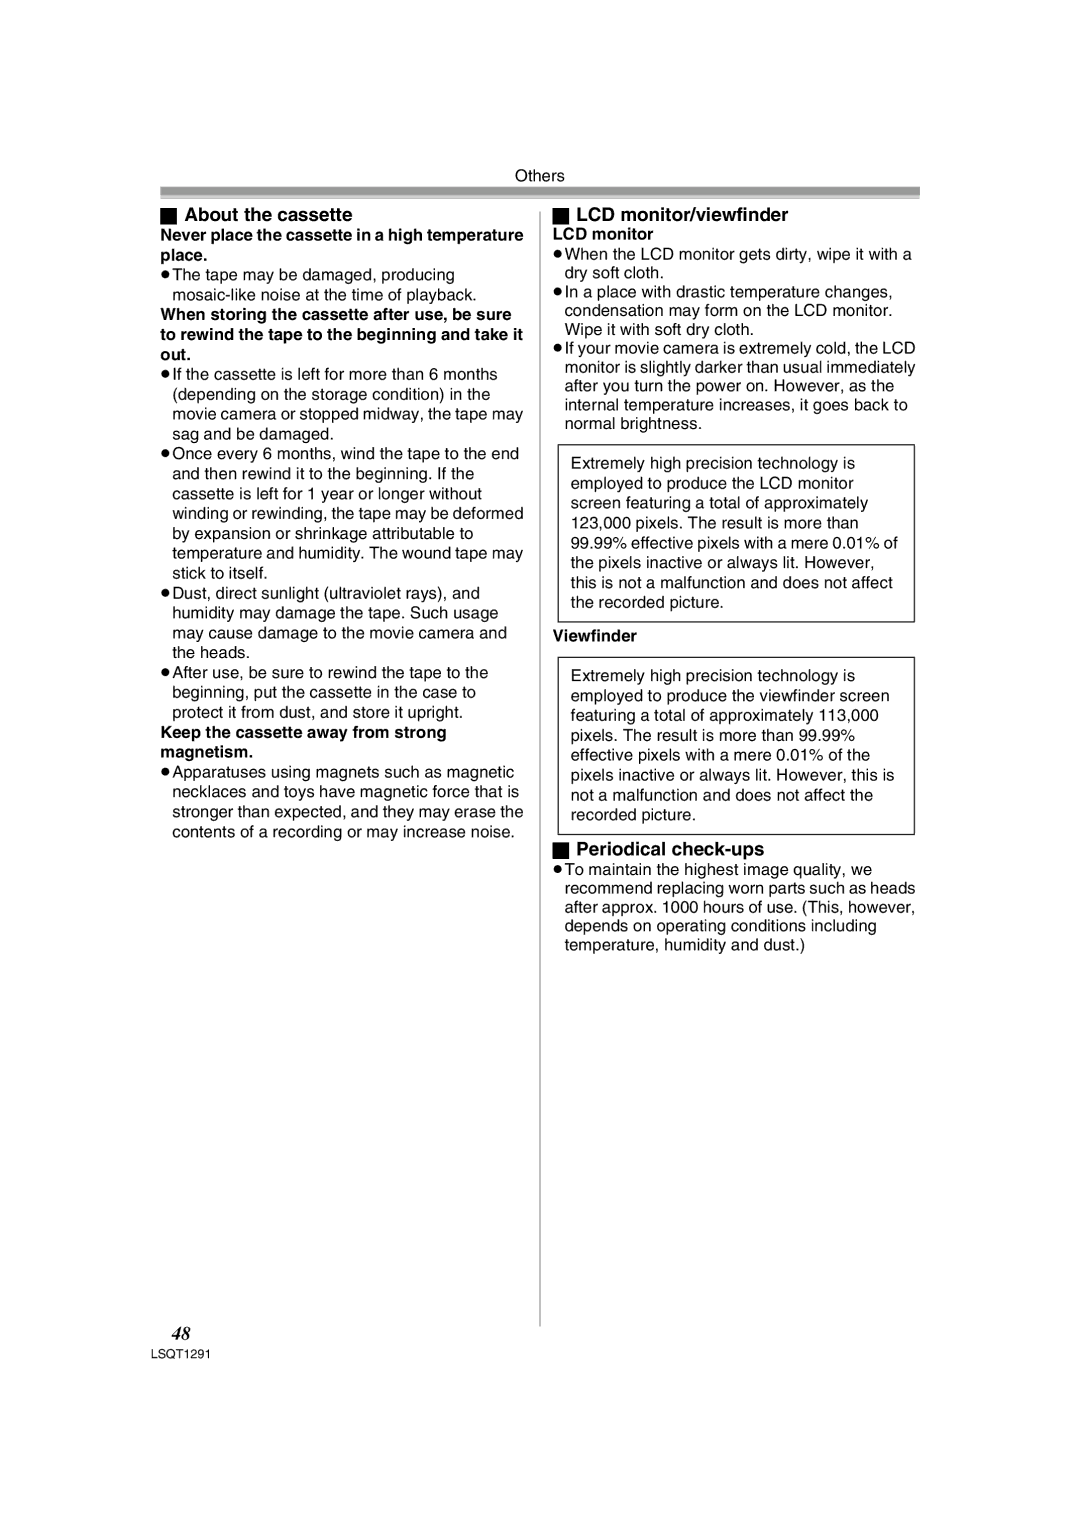 Panasonic NV-GS90 operating instructions About the cassette LCD monitor/viewfinder, Periodical check-ups 